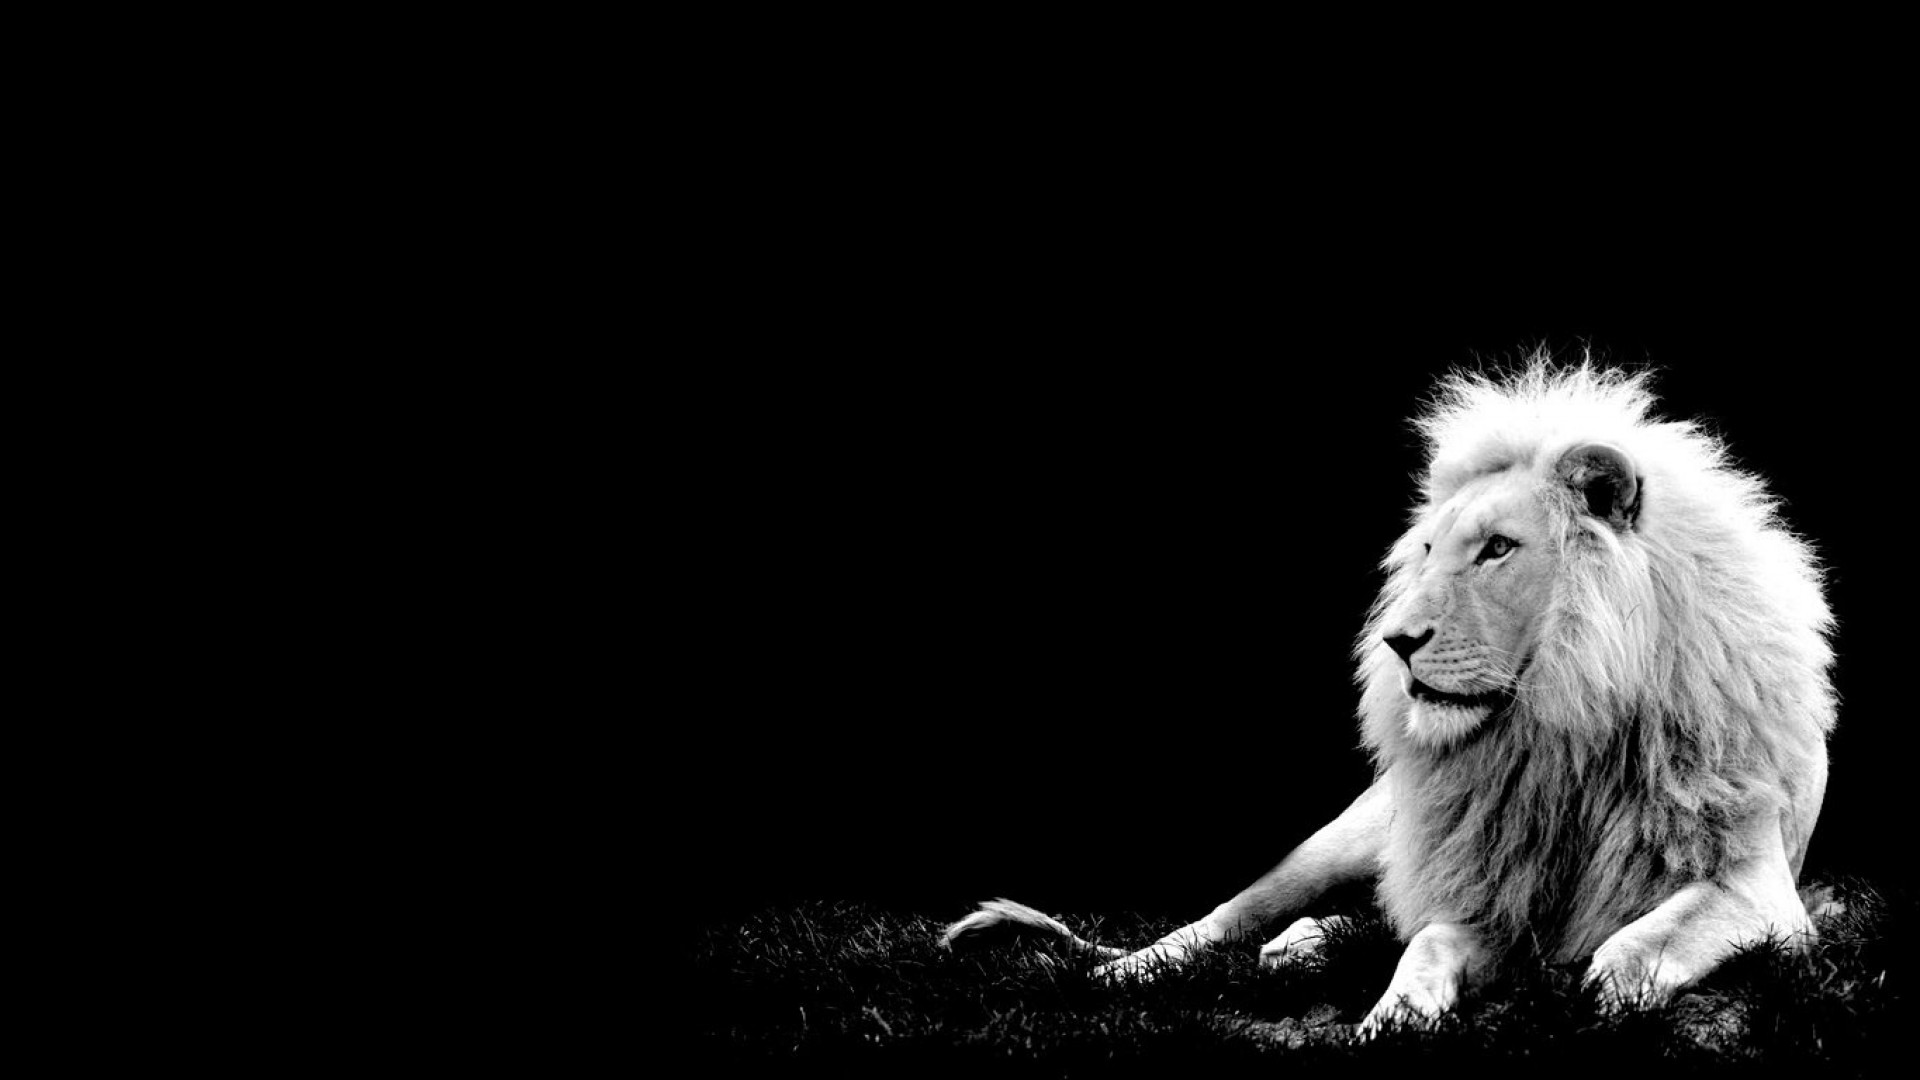 Lion Wallpaper Black And White Images amp Pictures   Becuo